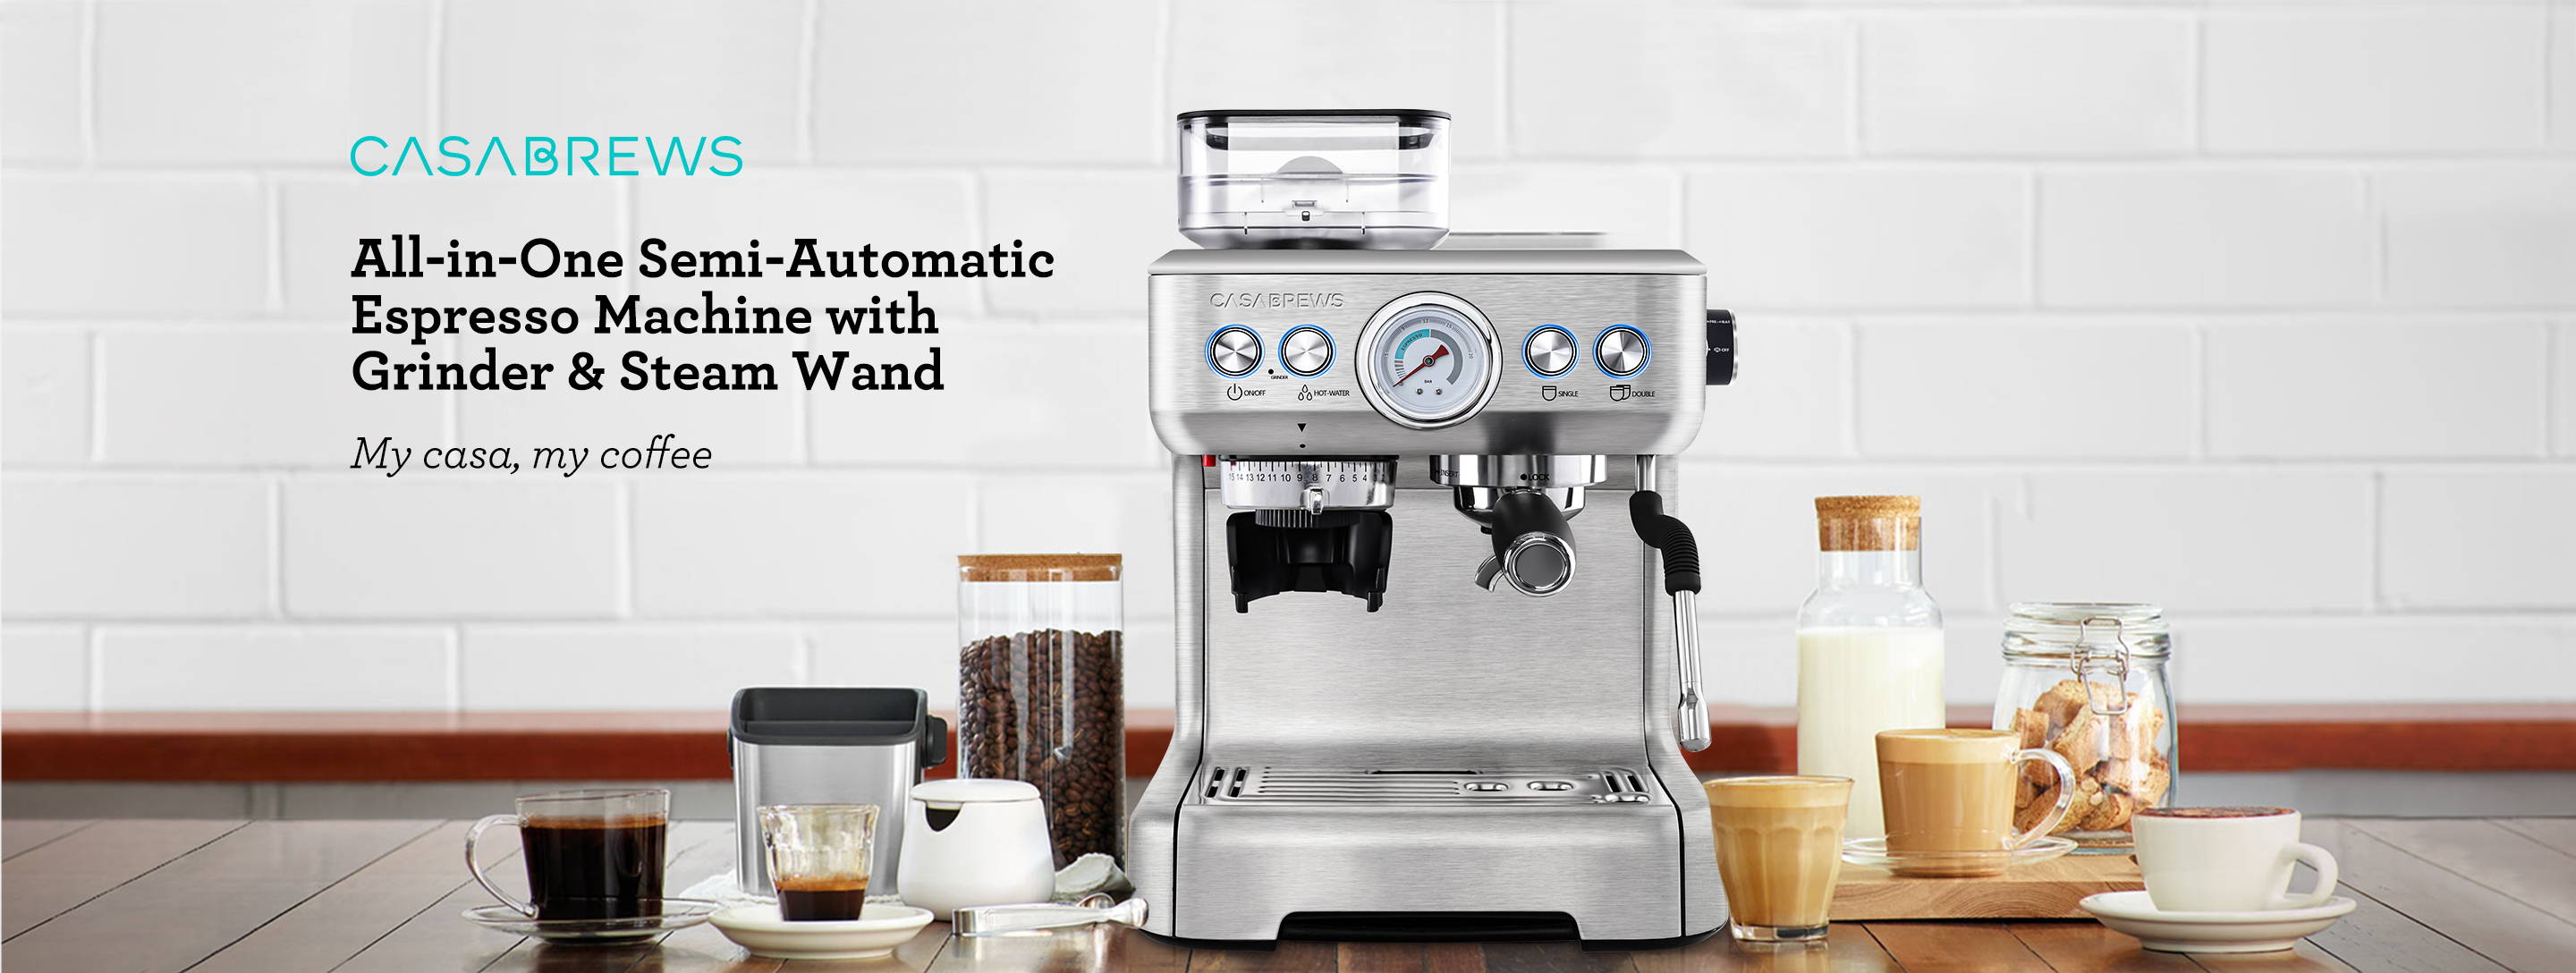 Casabrews all in one semi sutomatic espresso machine with grinder and steam wand